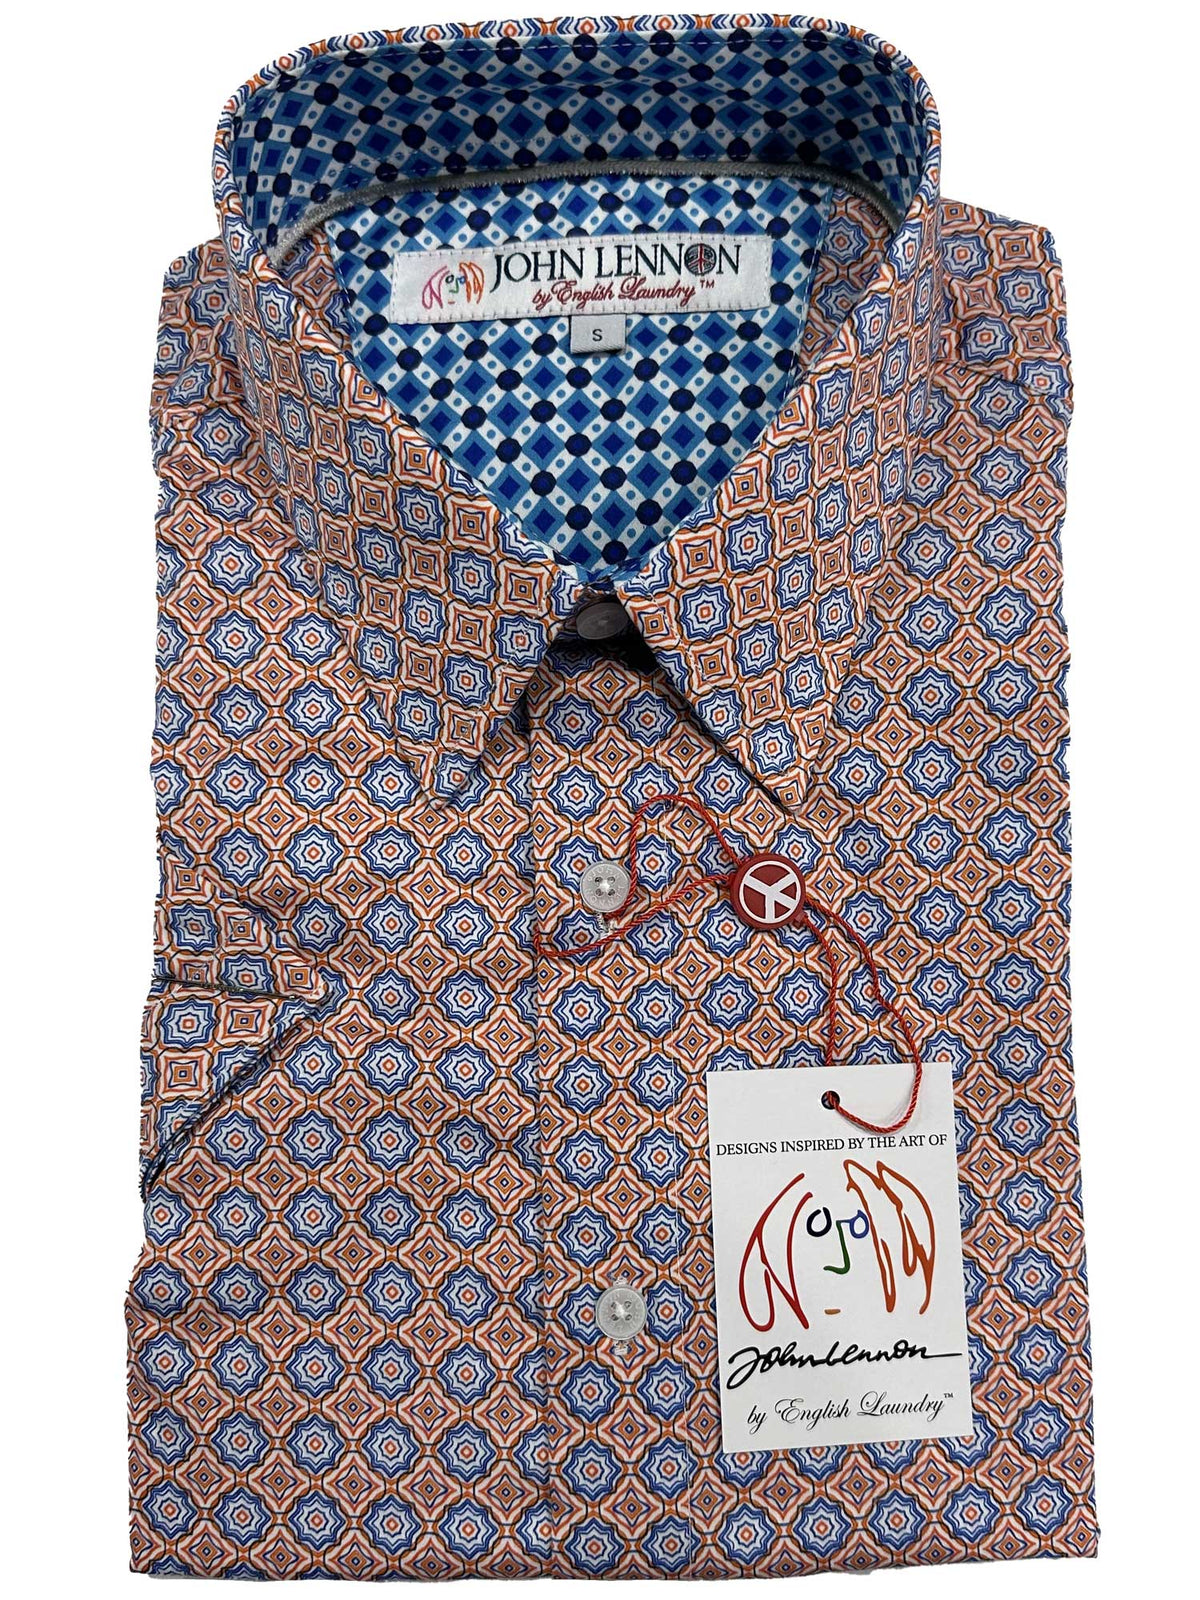 Shop Brighton JLW8033 S/S  https://harrysformenswear.com.au/products/jlw8096s-hull  Shop Brighton JLW8033 S/S. Short Sleeves Slim Fit All Cotton with a touch of classic detailing that reflects the fashion and sense of John Lennon's uniqueness. Creating harmony and peace with nature, this shirt does in spades. John Lennon for English Laundry….The Sleeping Giant. This is the 13th season Australian reta…